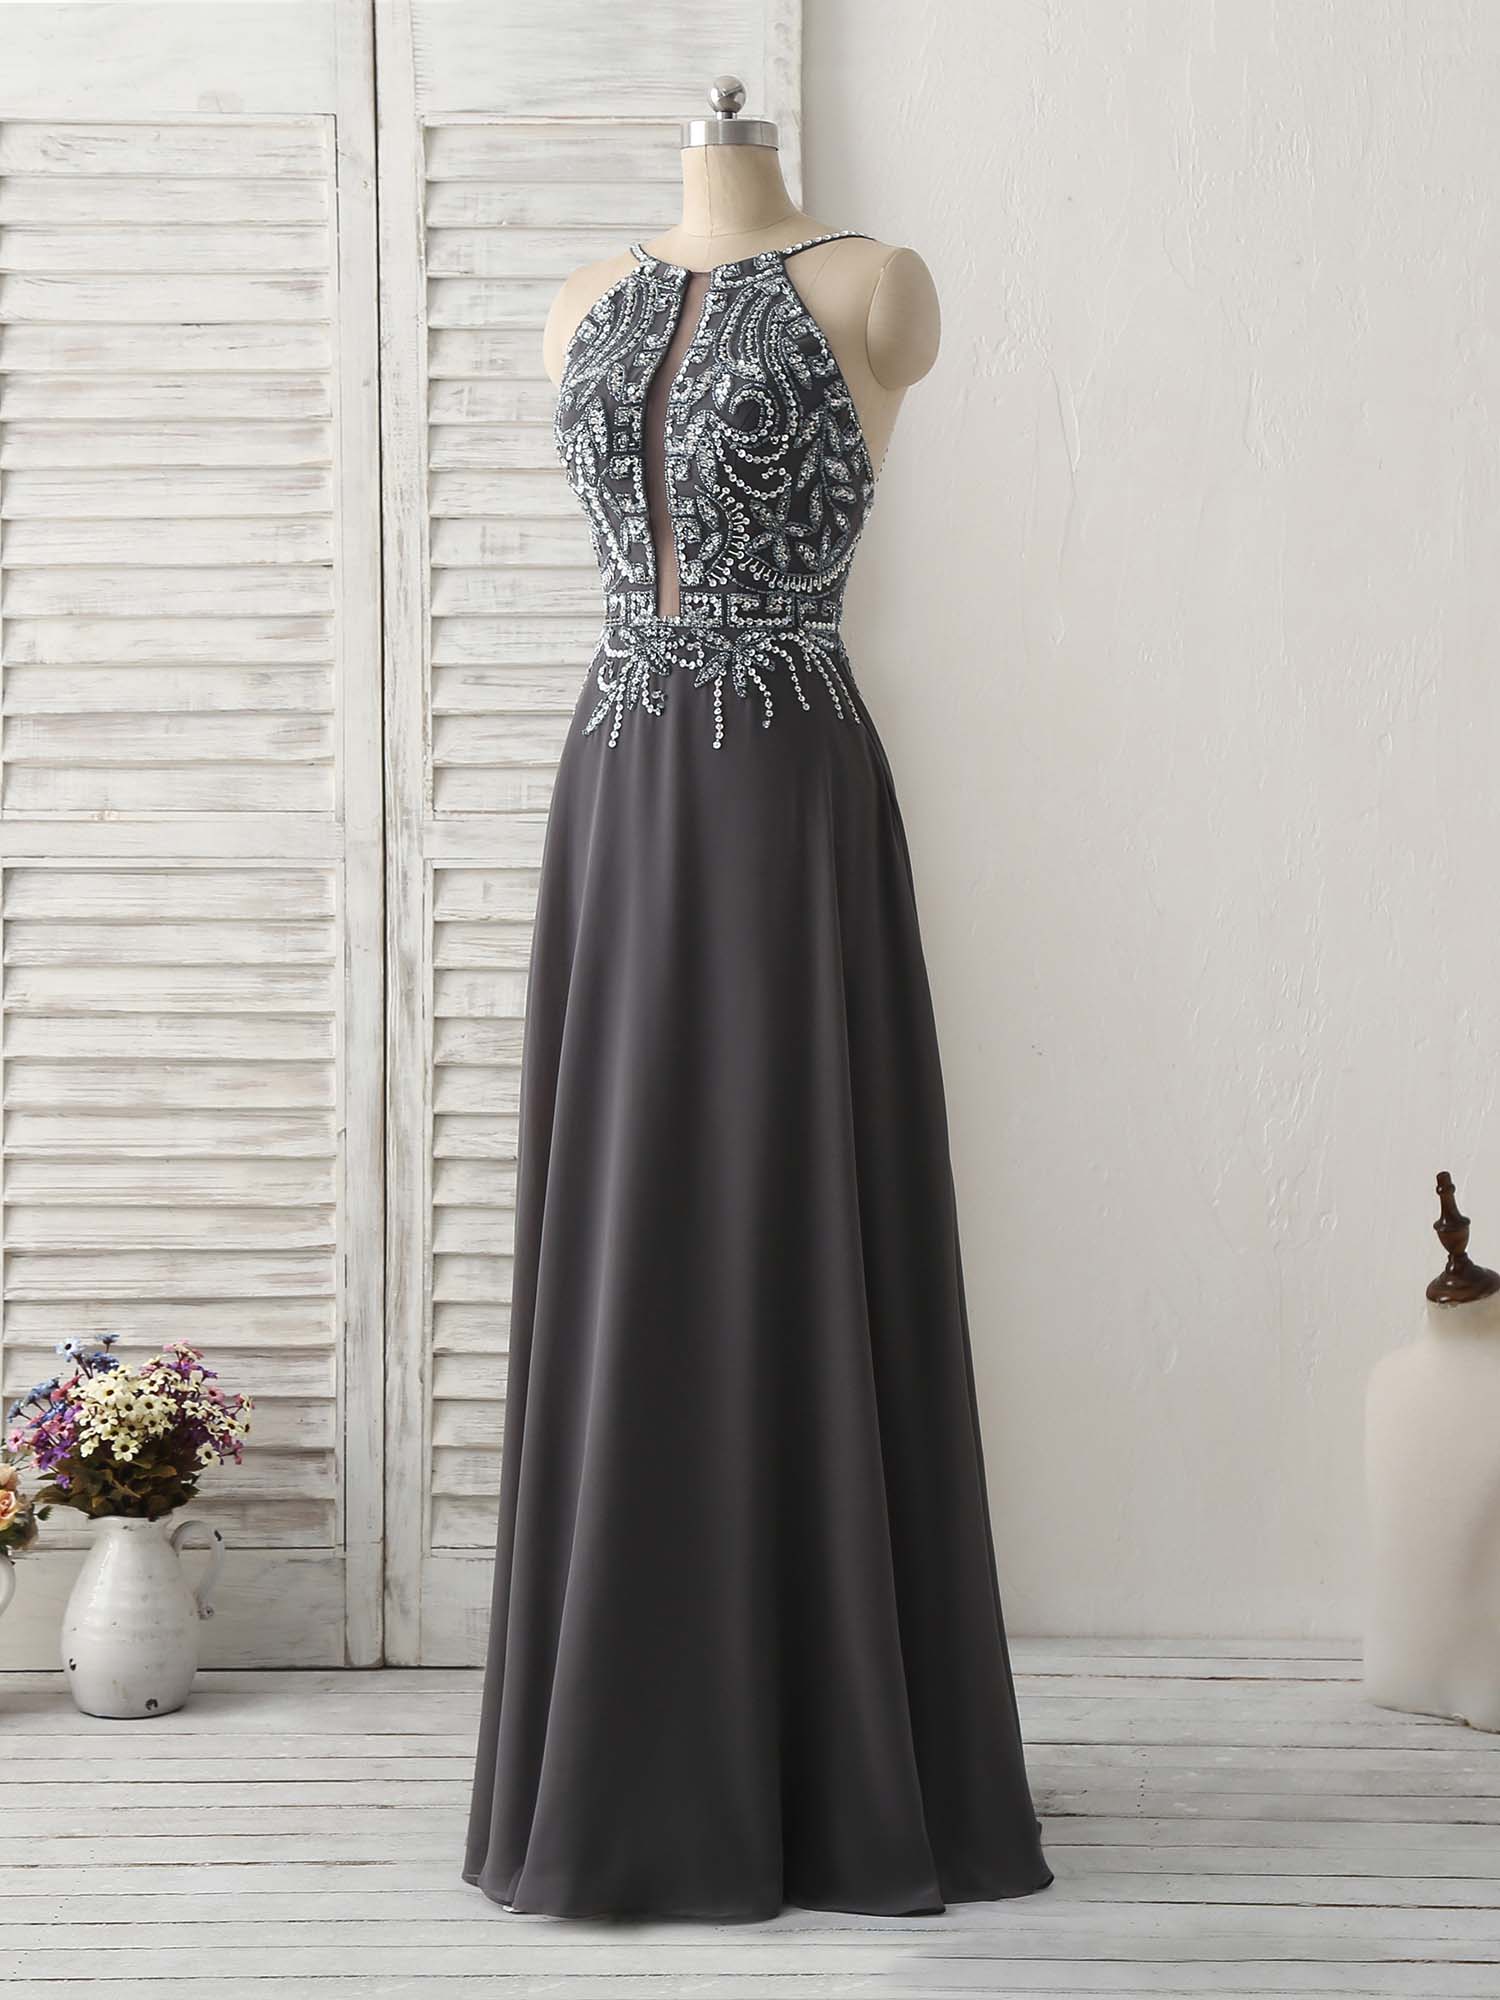 Party Dresses Jumpsuits, Dark Gray Sequin Beads Long Prom Dress Backless Evening Dress